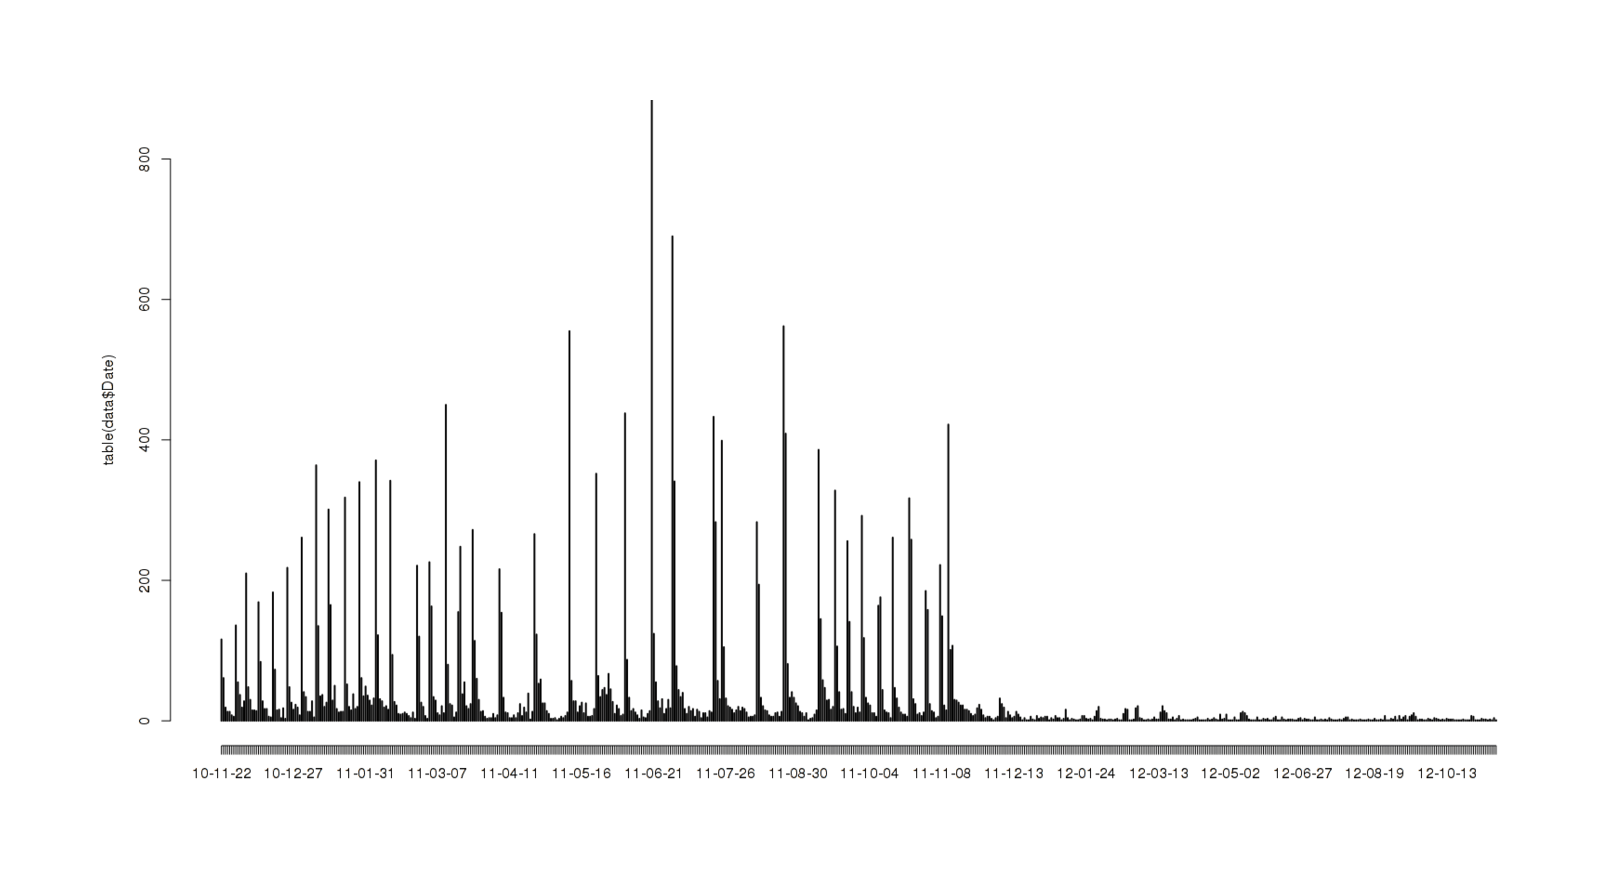 A graph of each day UC has existed against reviews left that day